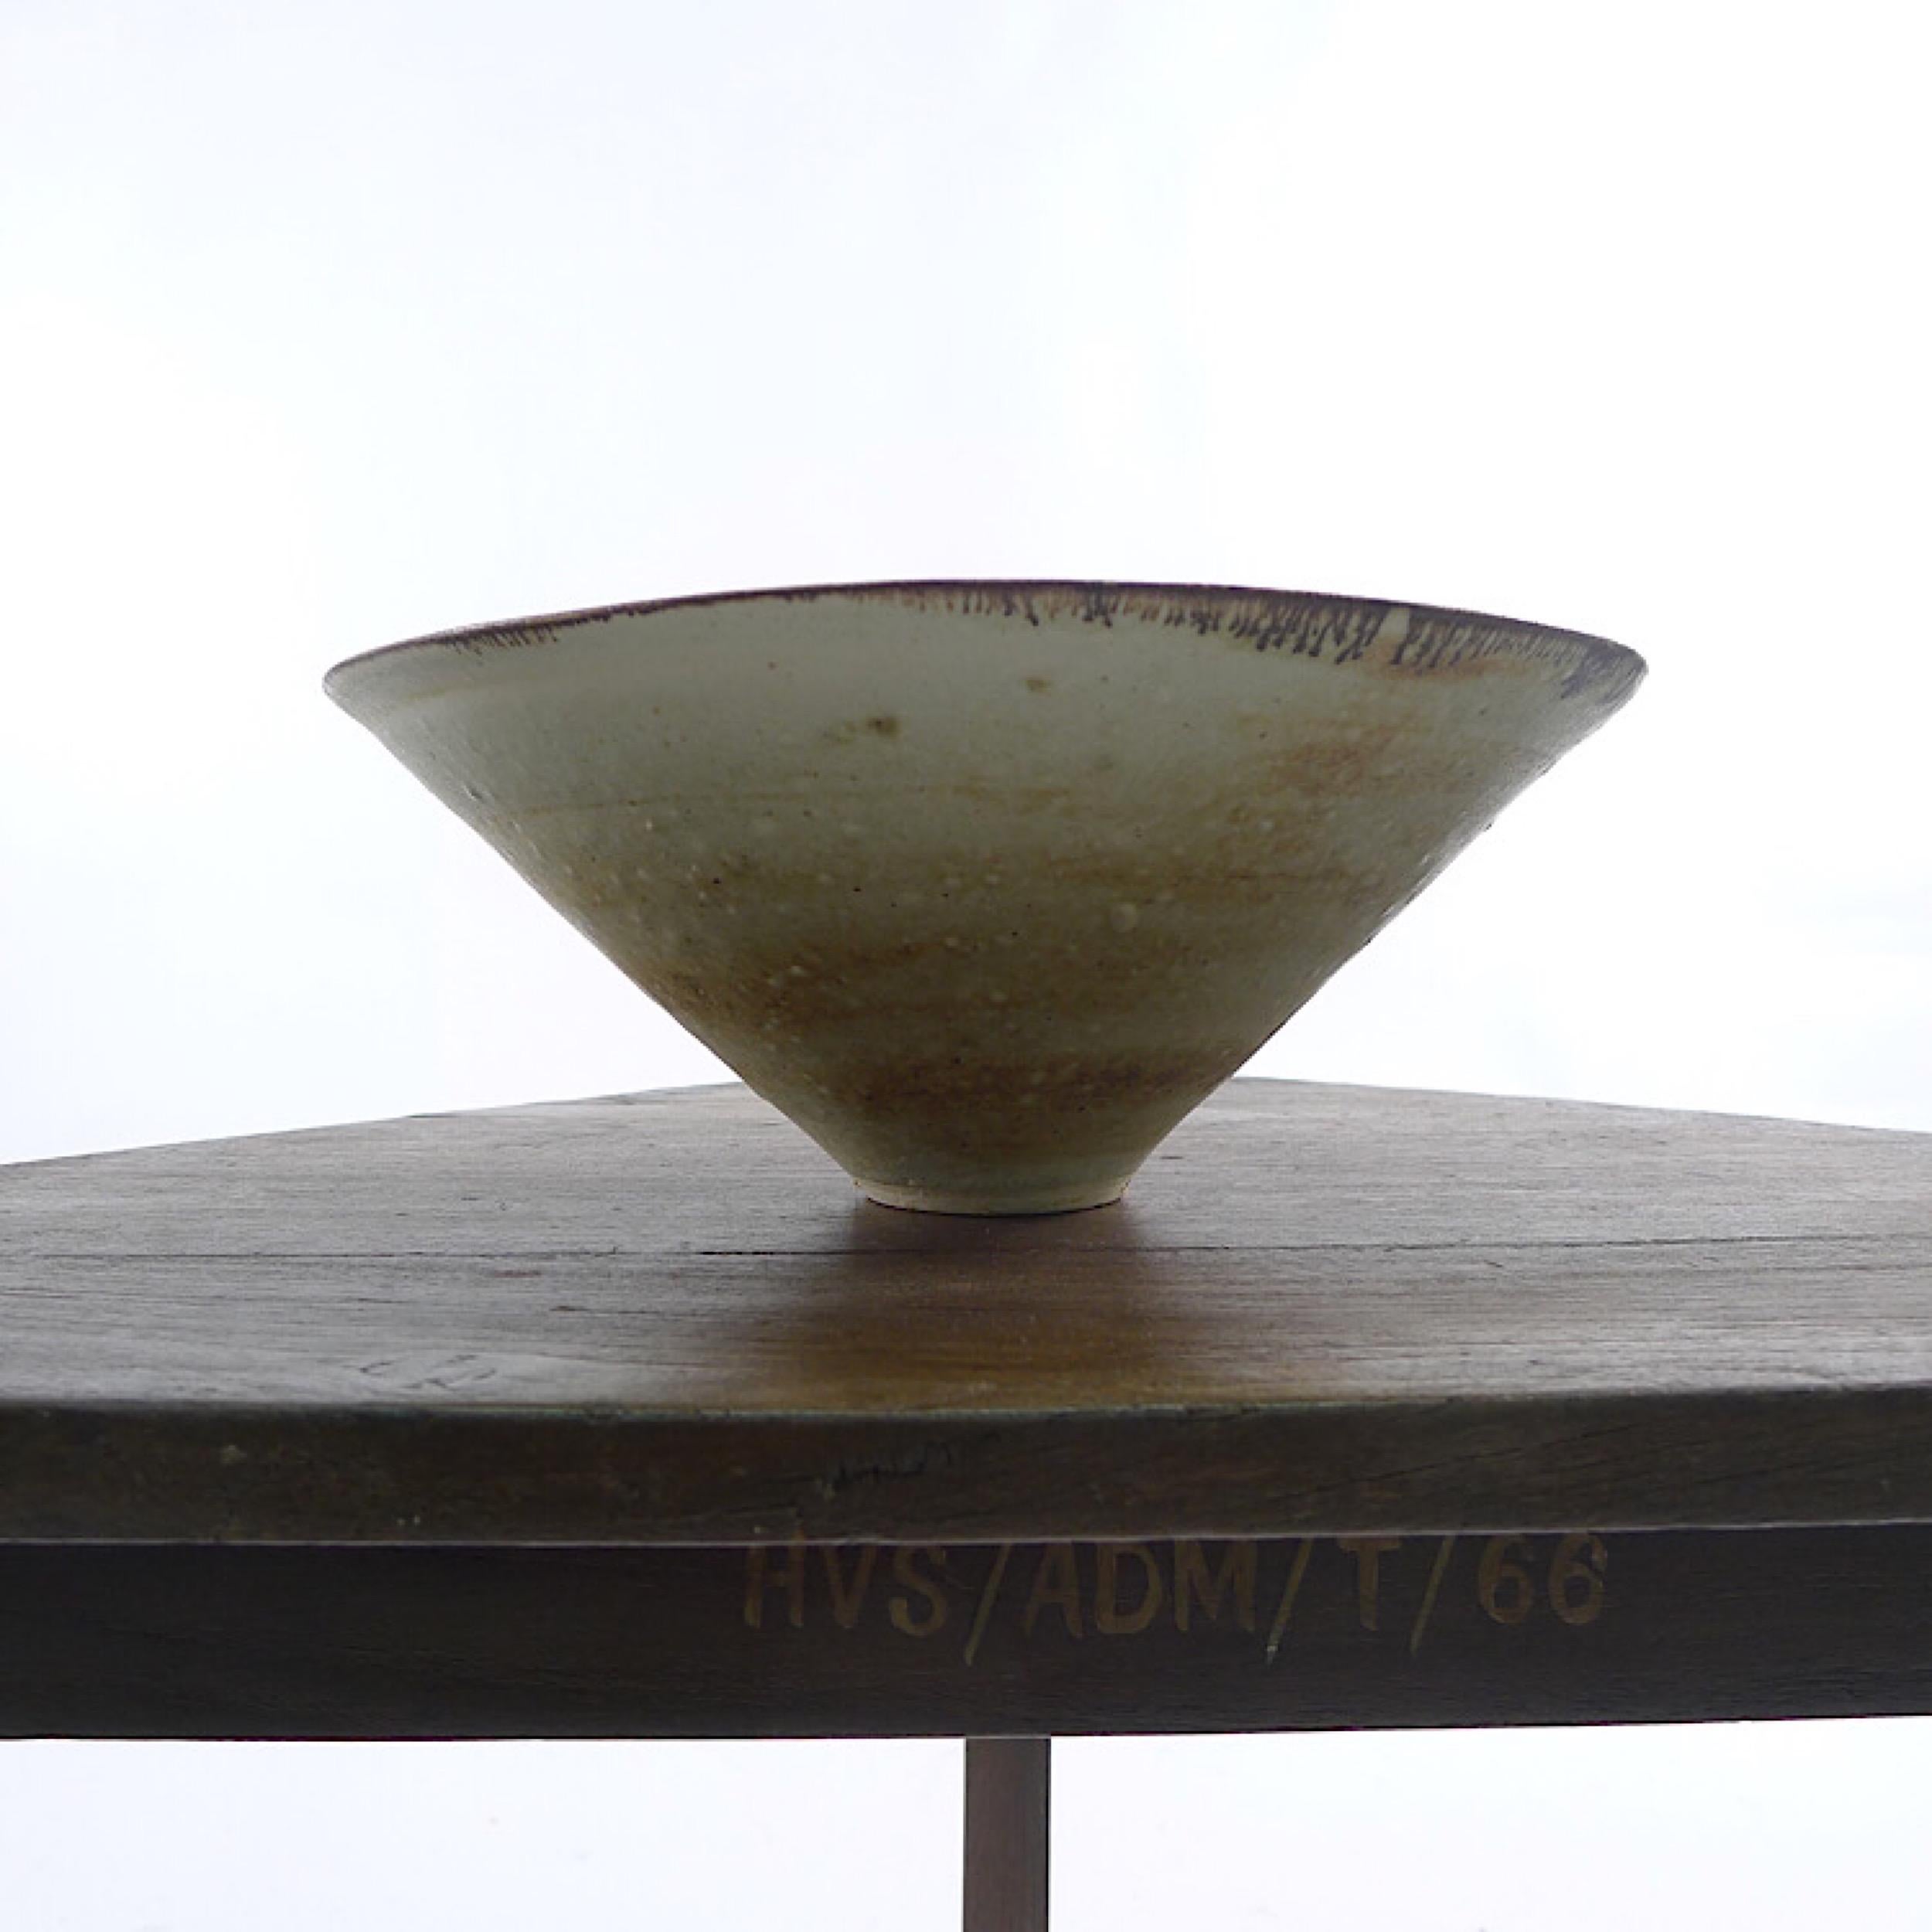 Hand-Crafted Lucie Rie, Porcelain Bowl, Flaring Conical Form, Impressed Seal Mark